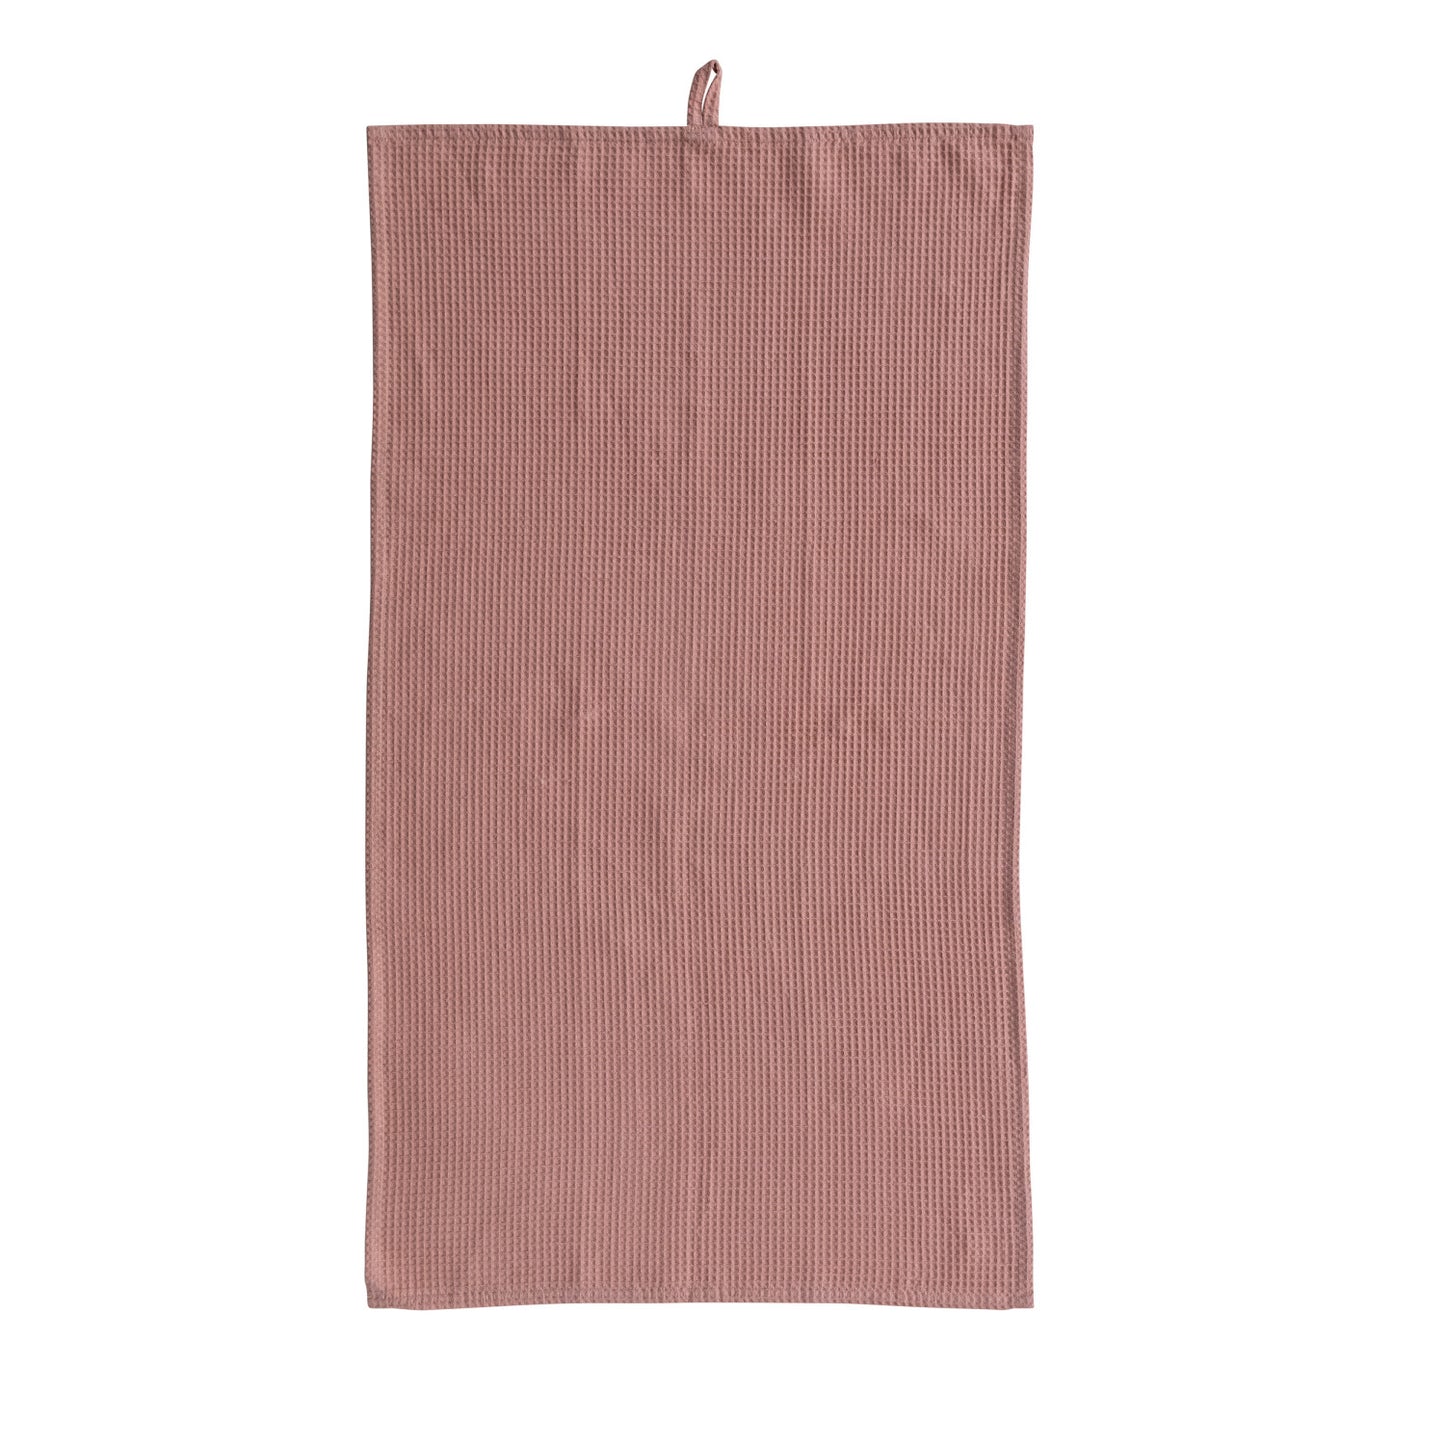 Oversized Woven Linen & Cotton Waffle Tea Towel w/ Loop Putty Color